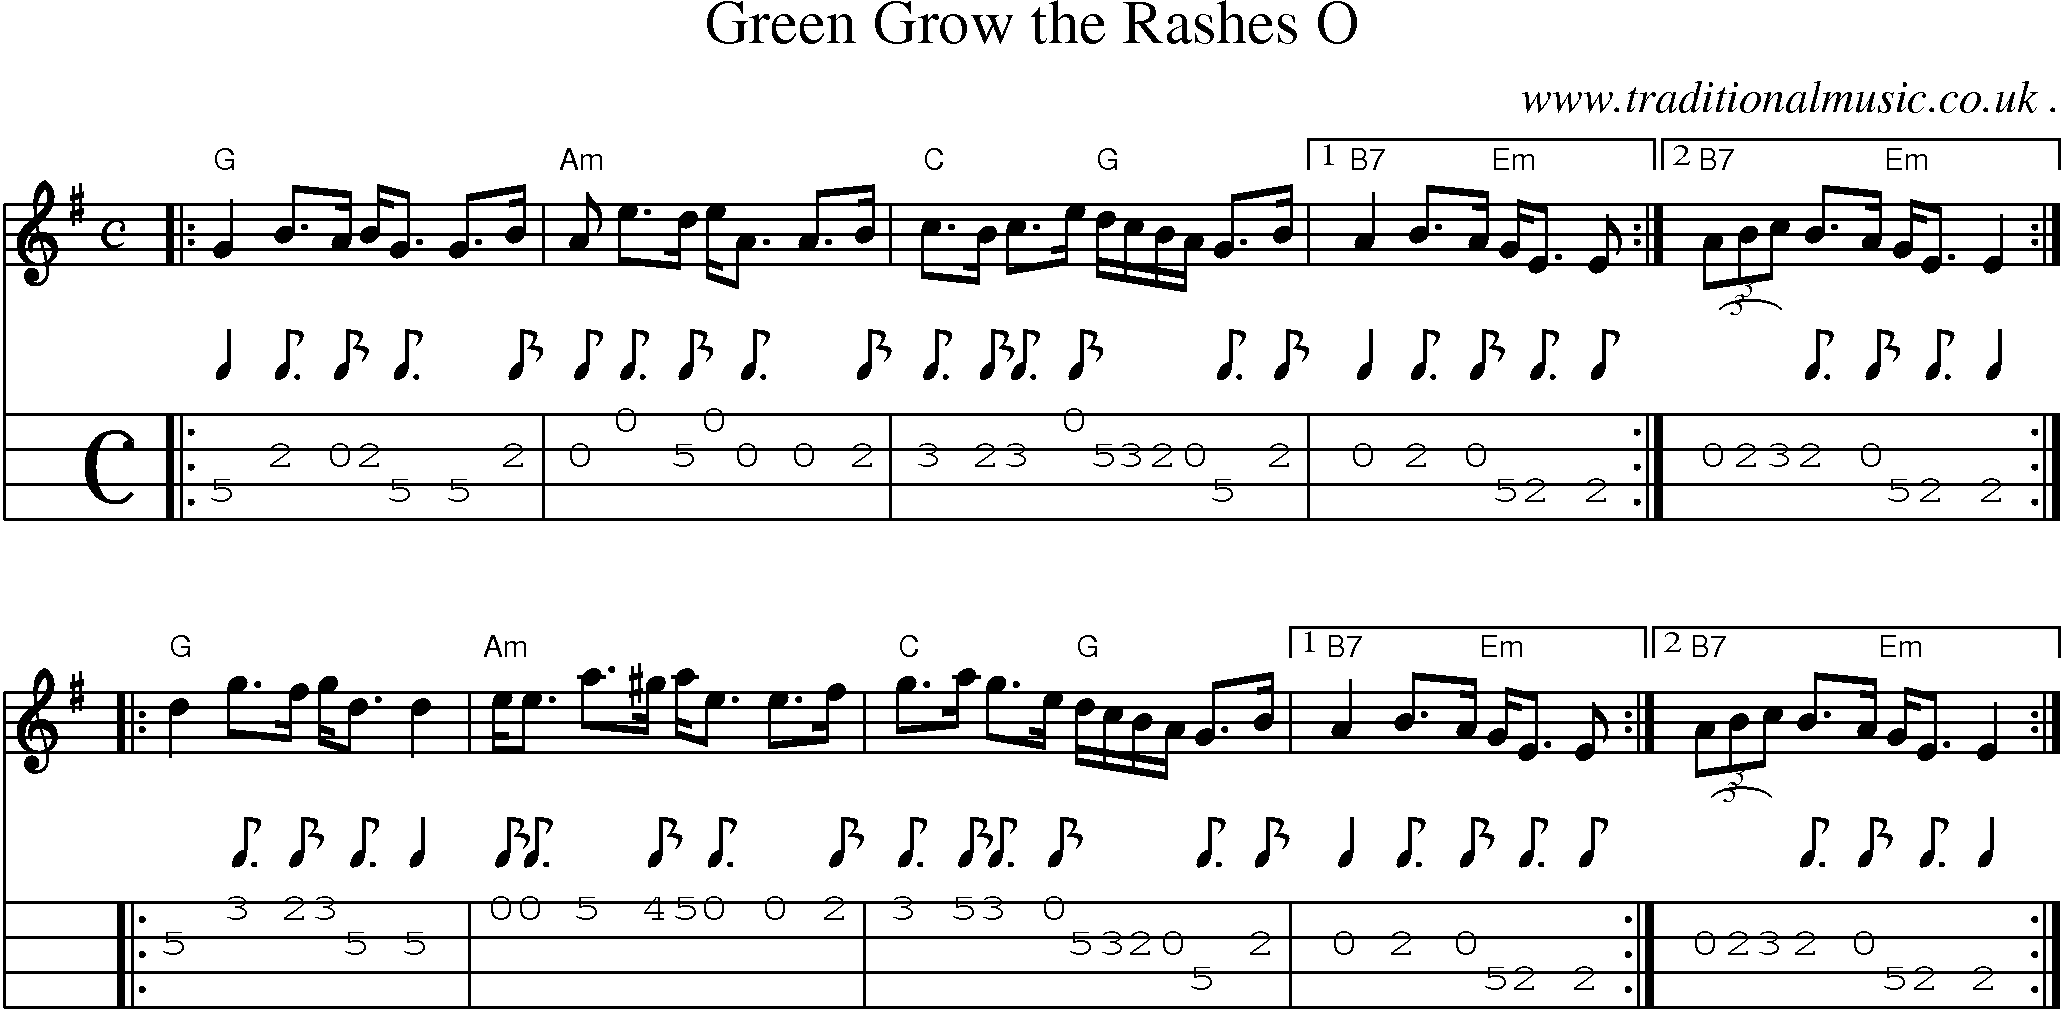 Sheet-music  score, Chords and Mandolin Tabs for Green Grow The Rashes O